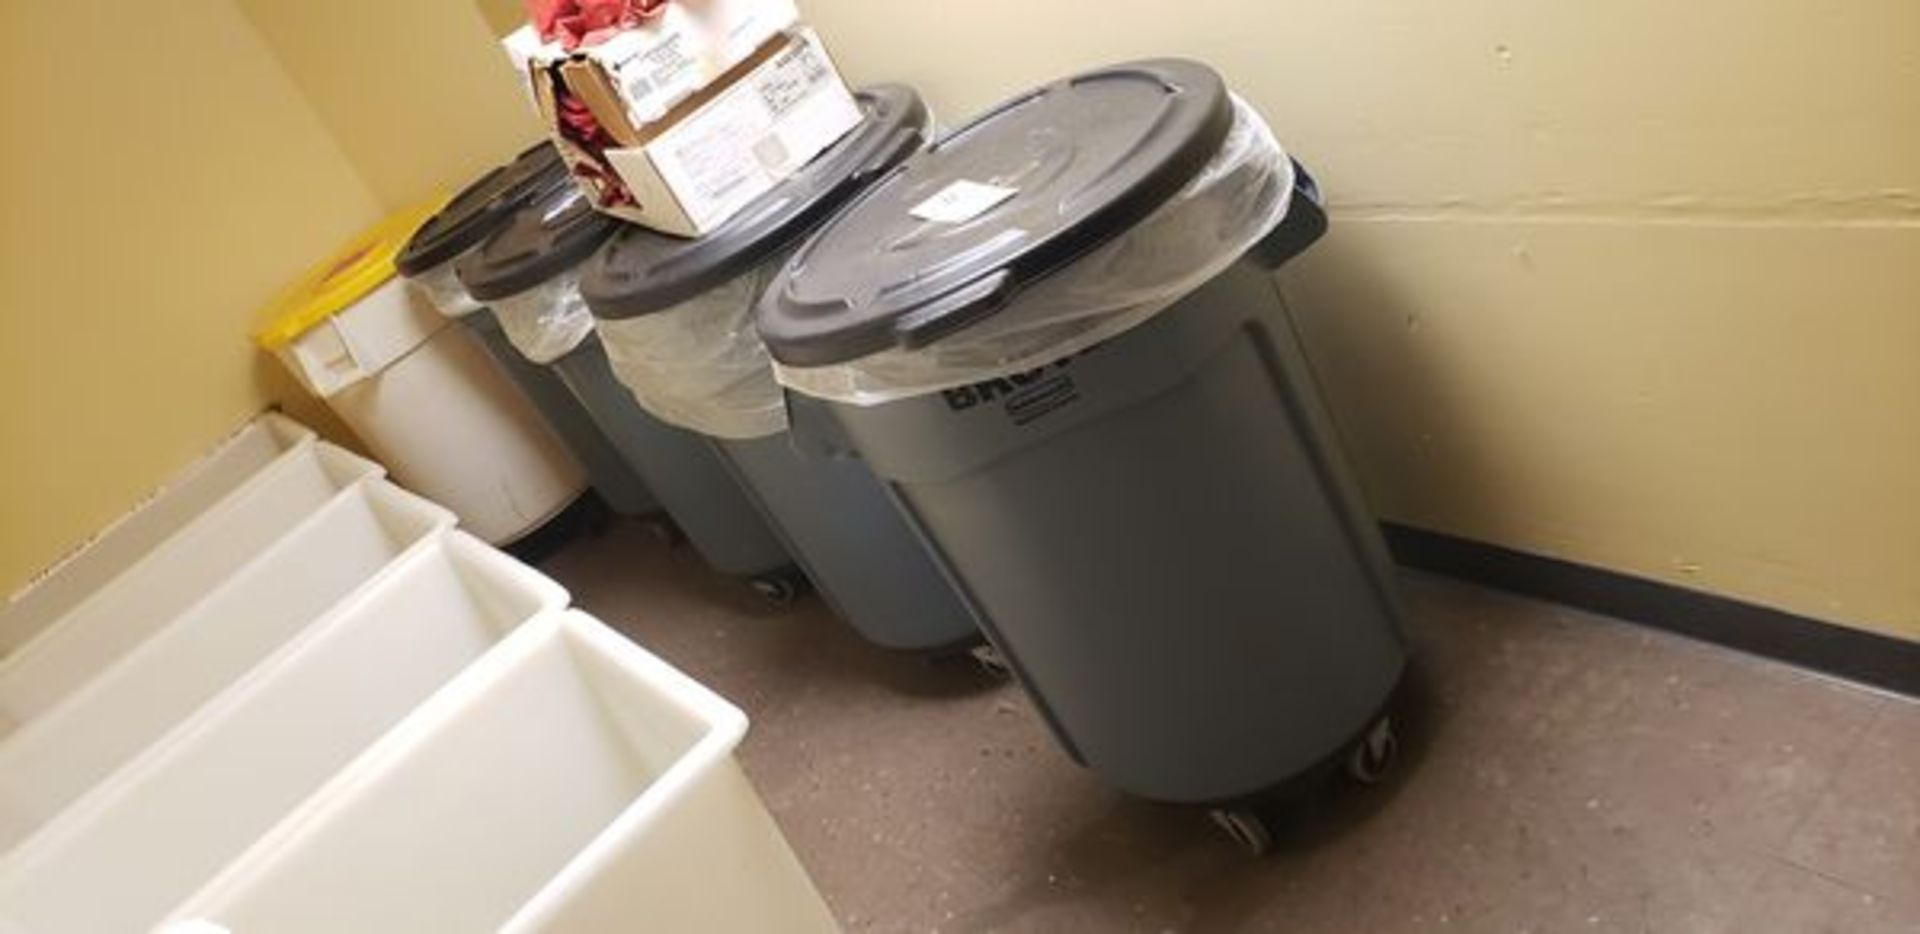 5 ROLLING TRASH CANS WITH BIOHAZARD BAGS